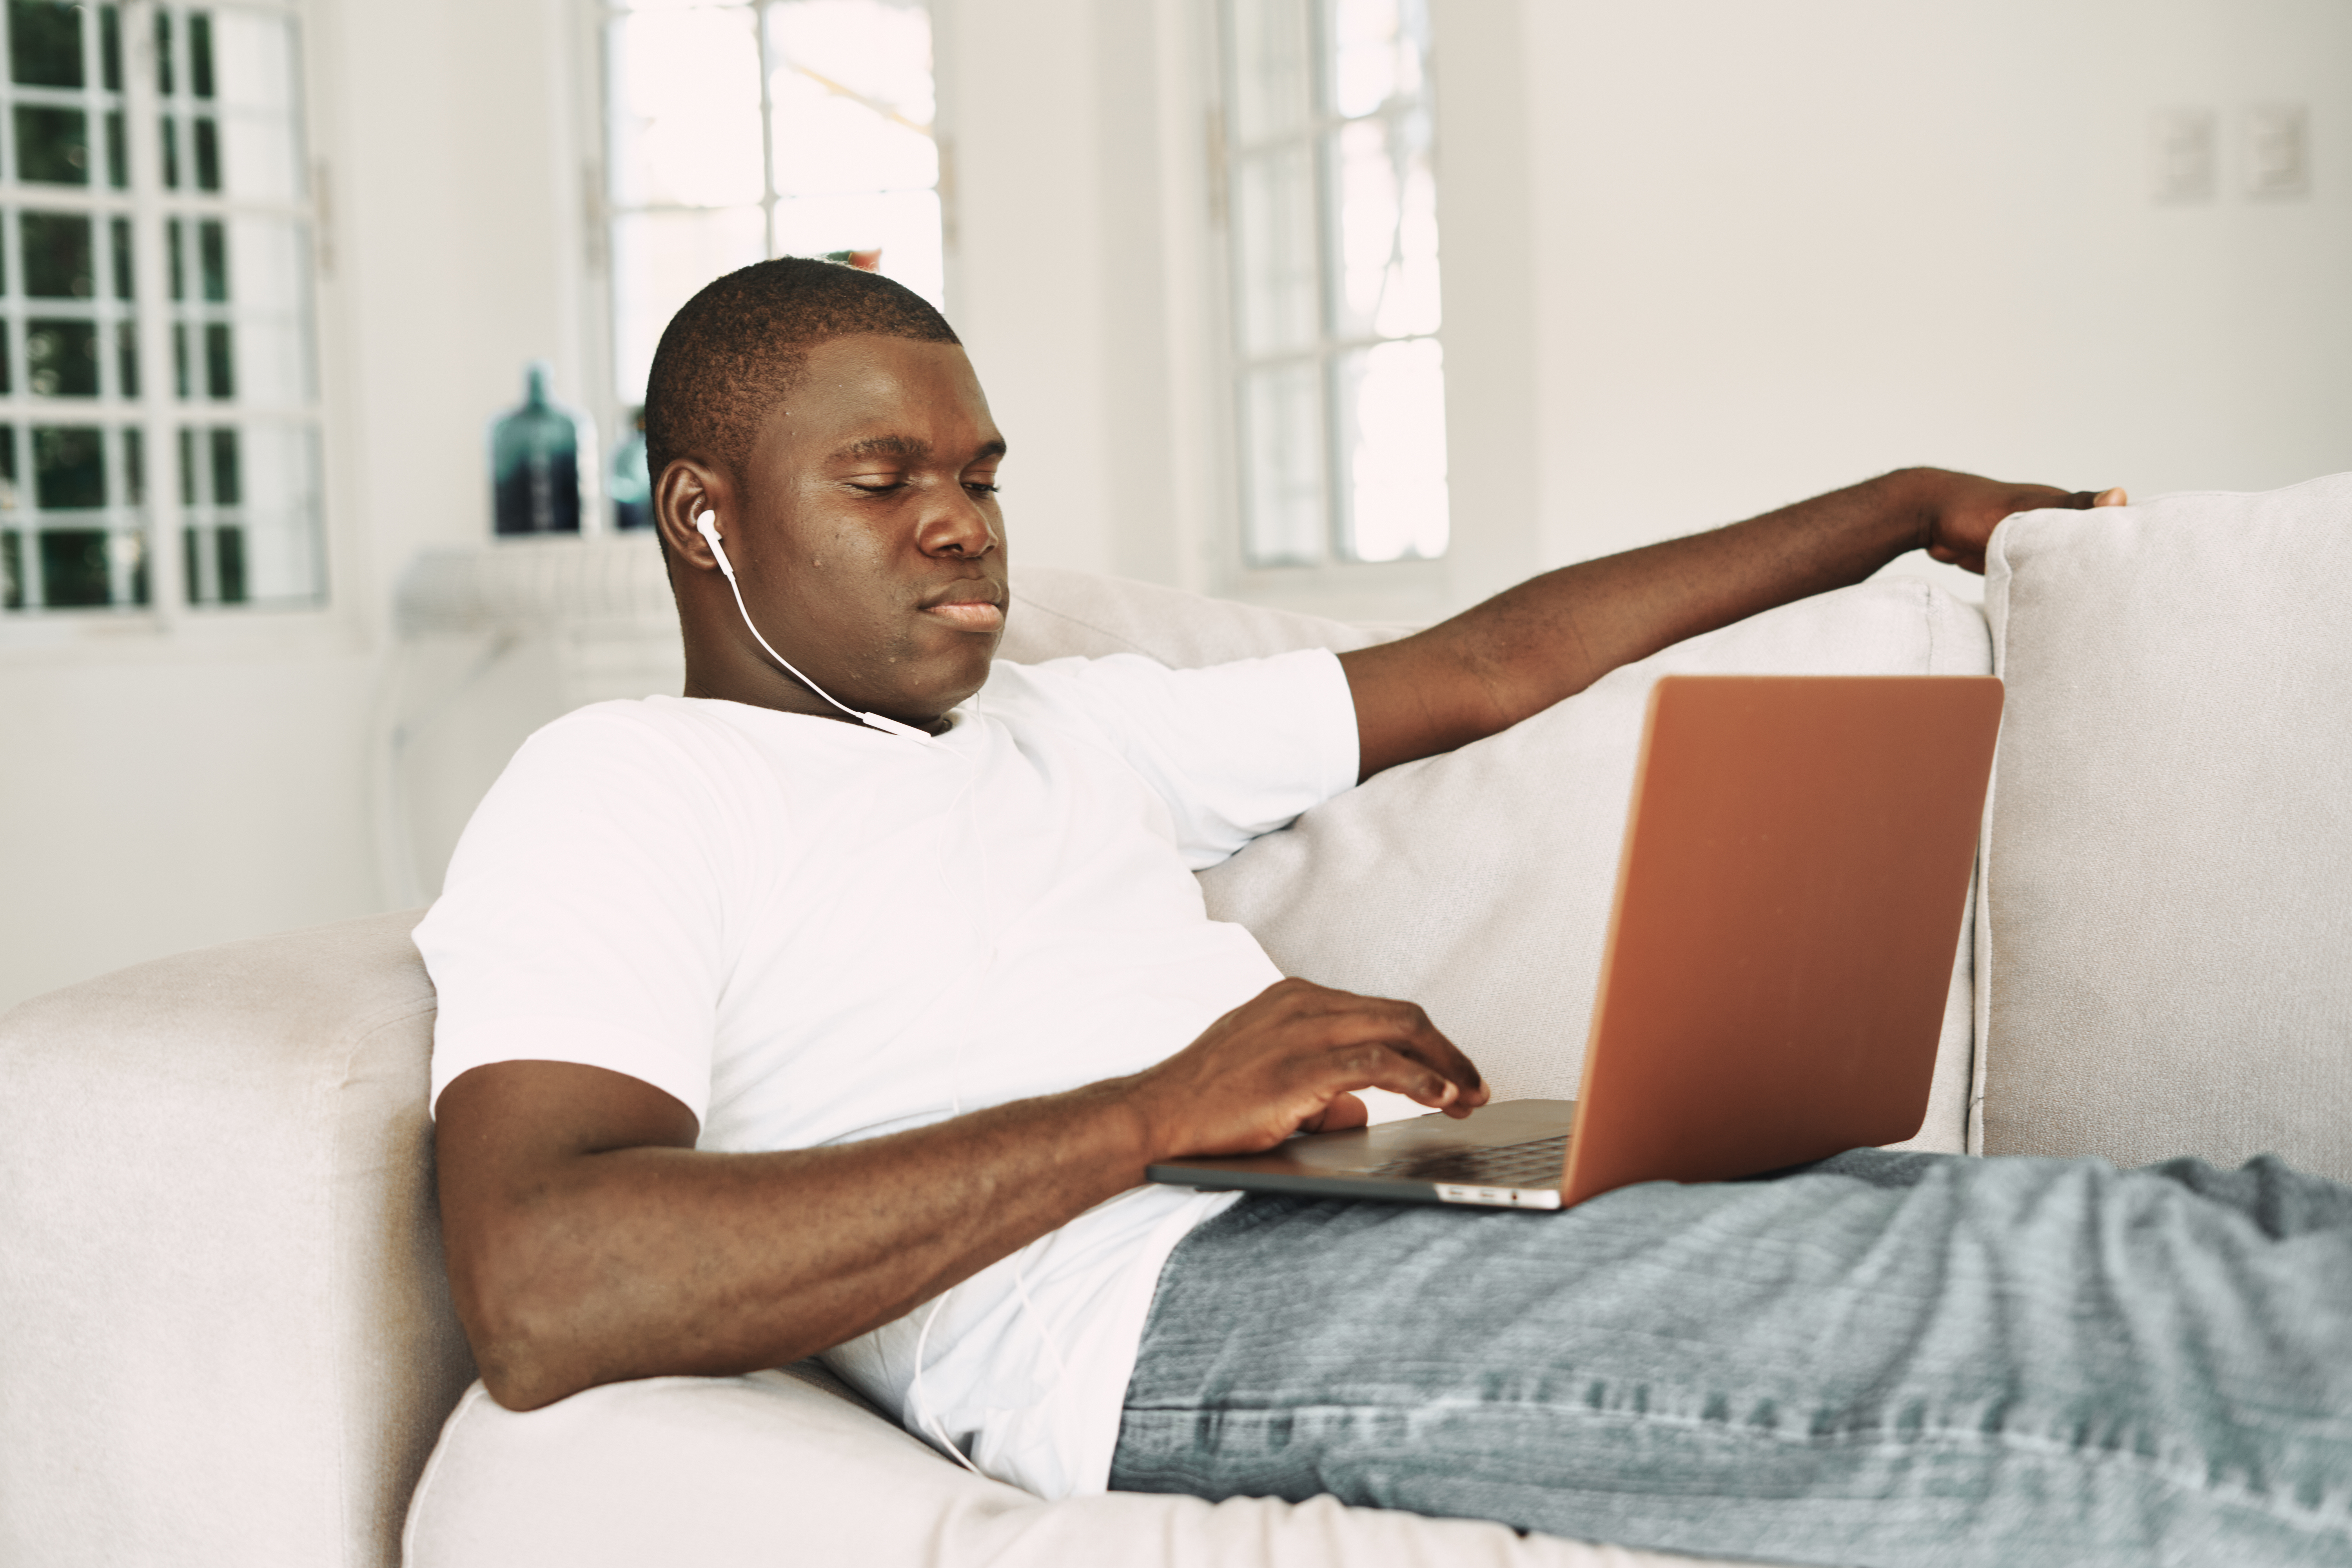 A nice guy of African appearance lies on the couch with headphones and a laptop on his lap